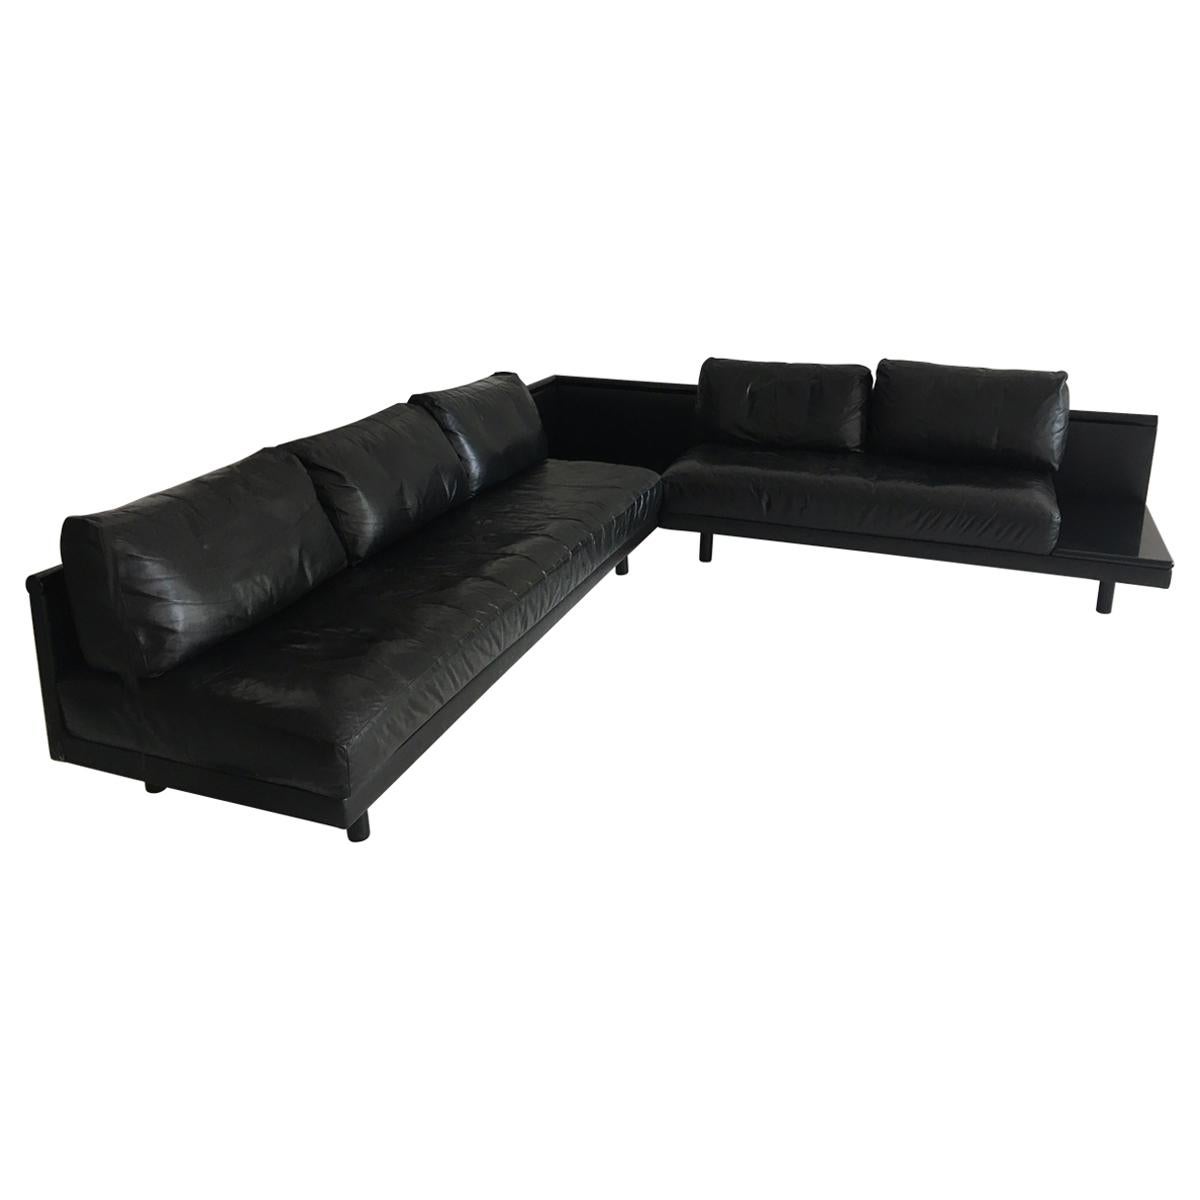 Dino Gavina Sofa Suite Black Leather Sectional, Living Room Suite, Italy, 1960